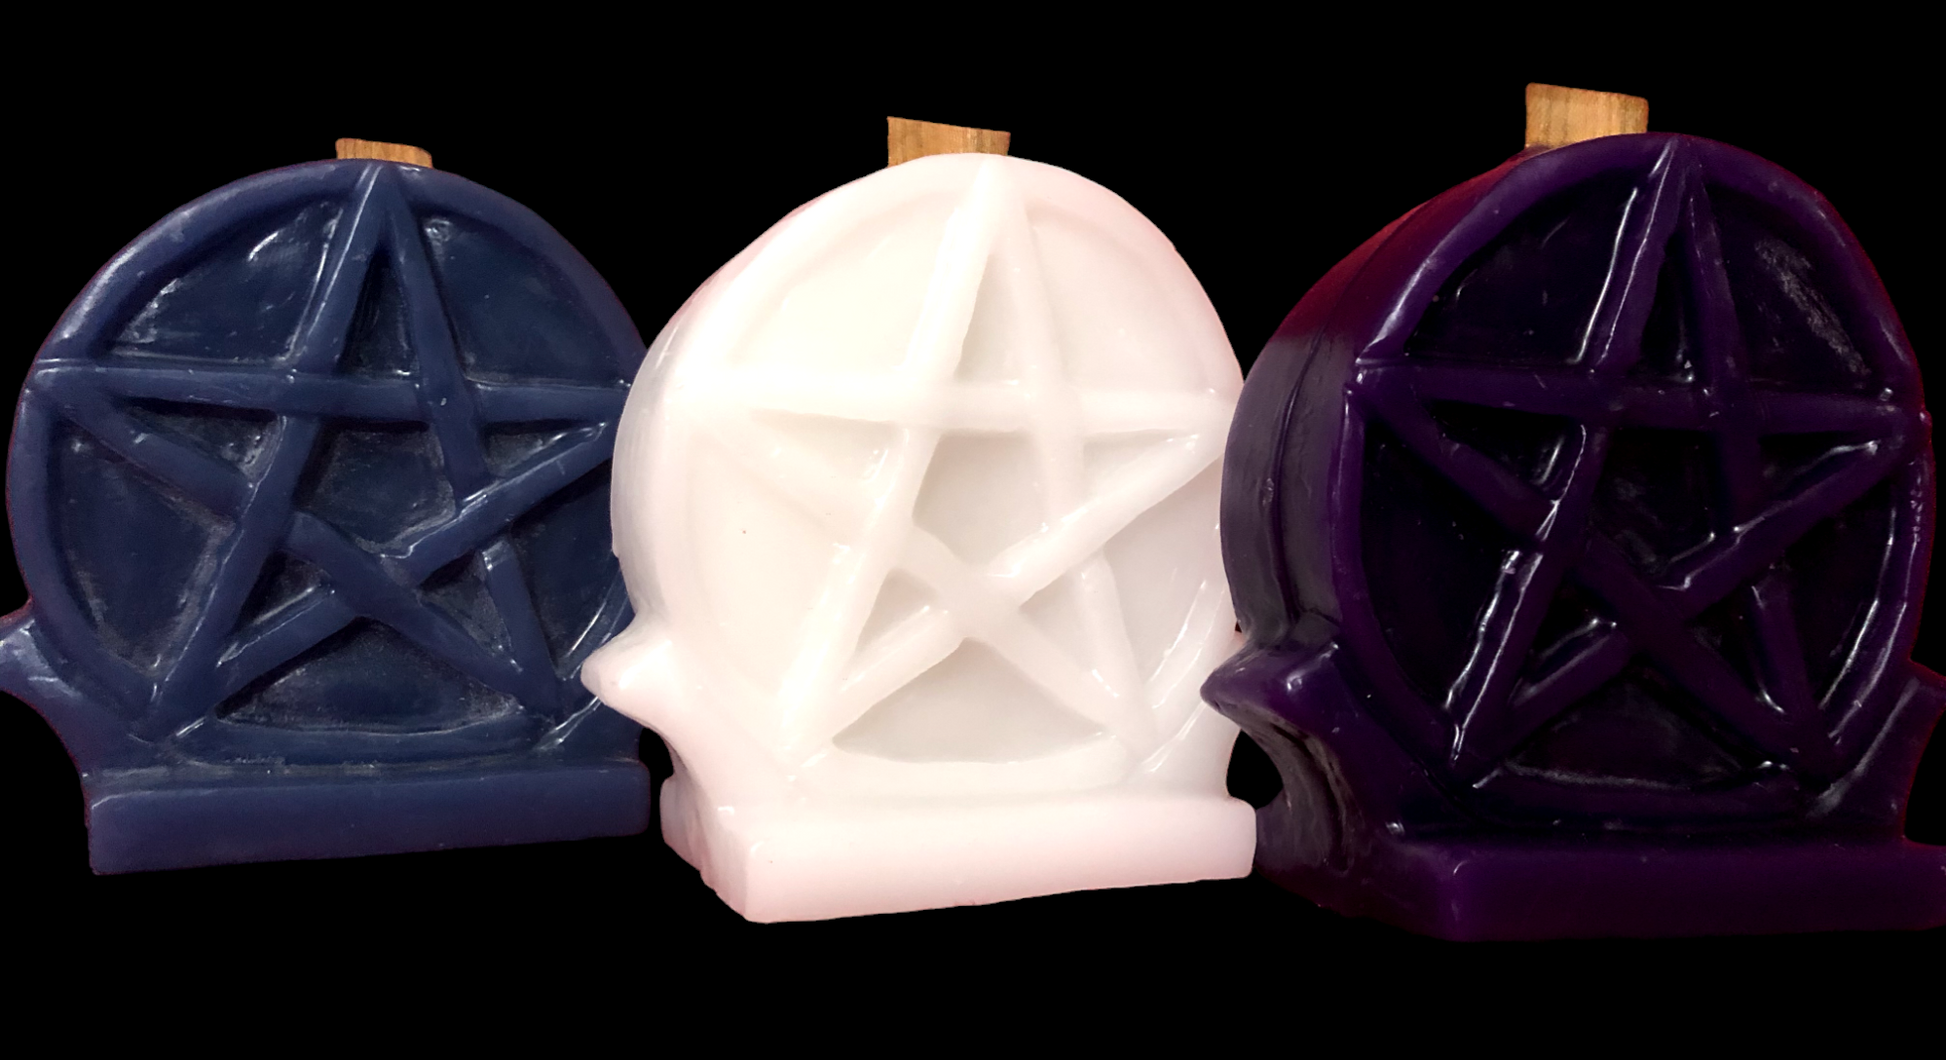 Handcrafted Pentacle Medallion Pillar Candle standing at 5.5x5x2 inches, featuring available in any colour. A sacred symbol adorns the candle, signifying spirituality and empowerment. Choose between Hemp, Cotton, or Wooden wicks for a personalized touch. For custom hand-painted options, contact us at purpose@purpledoorsociety.com